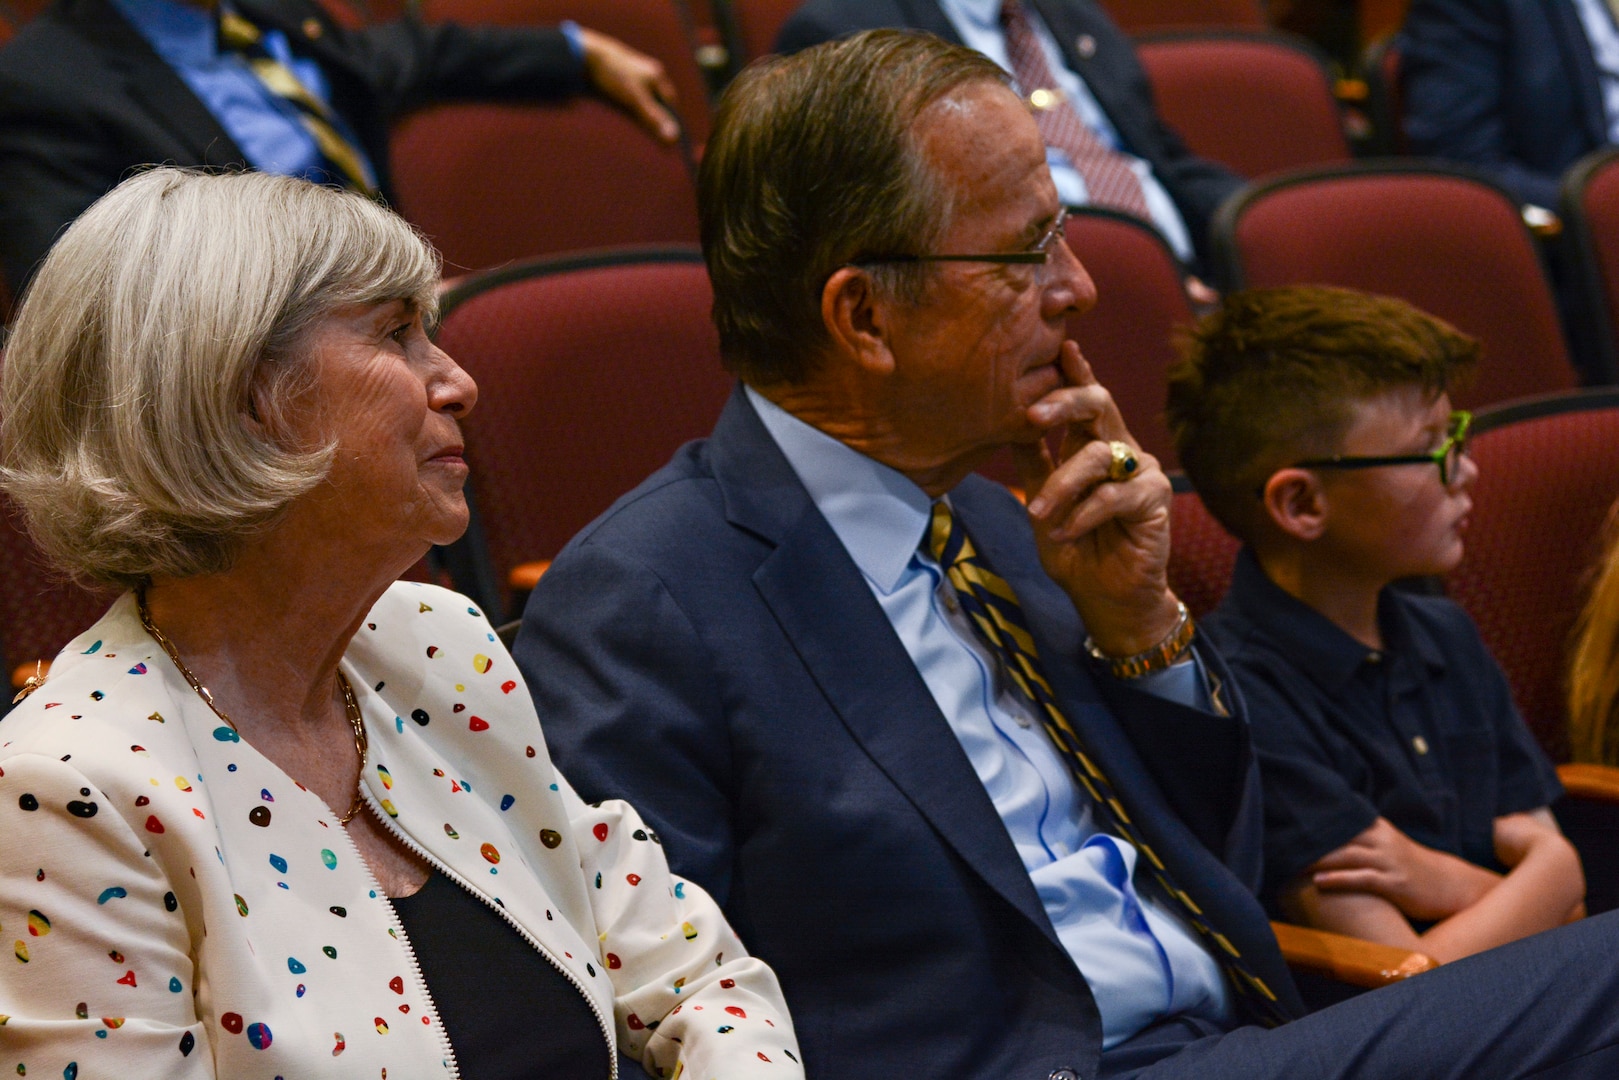 A man in a suit sits next to a woman in a white dress with a boy with glasses next to them in an auditorium.